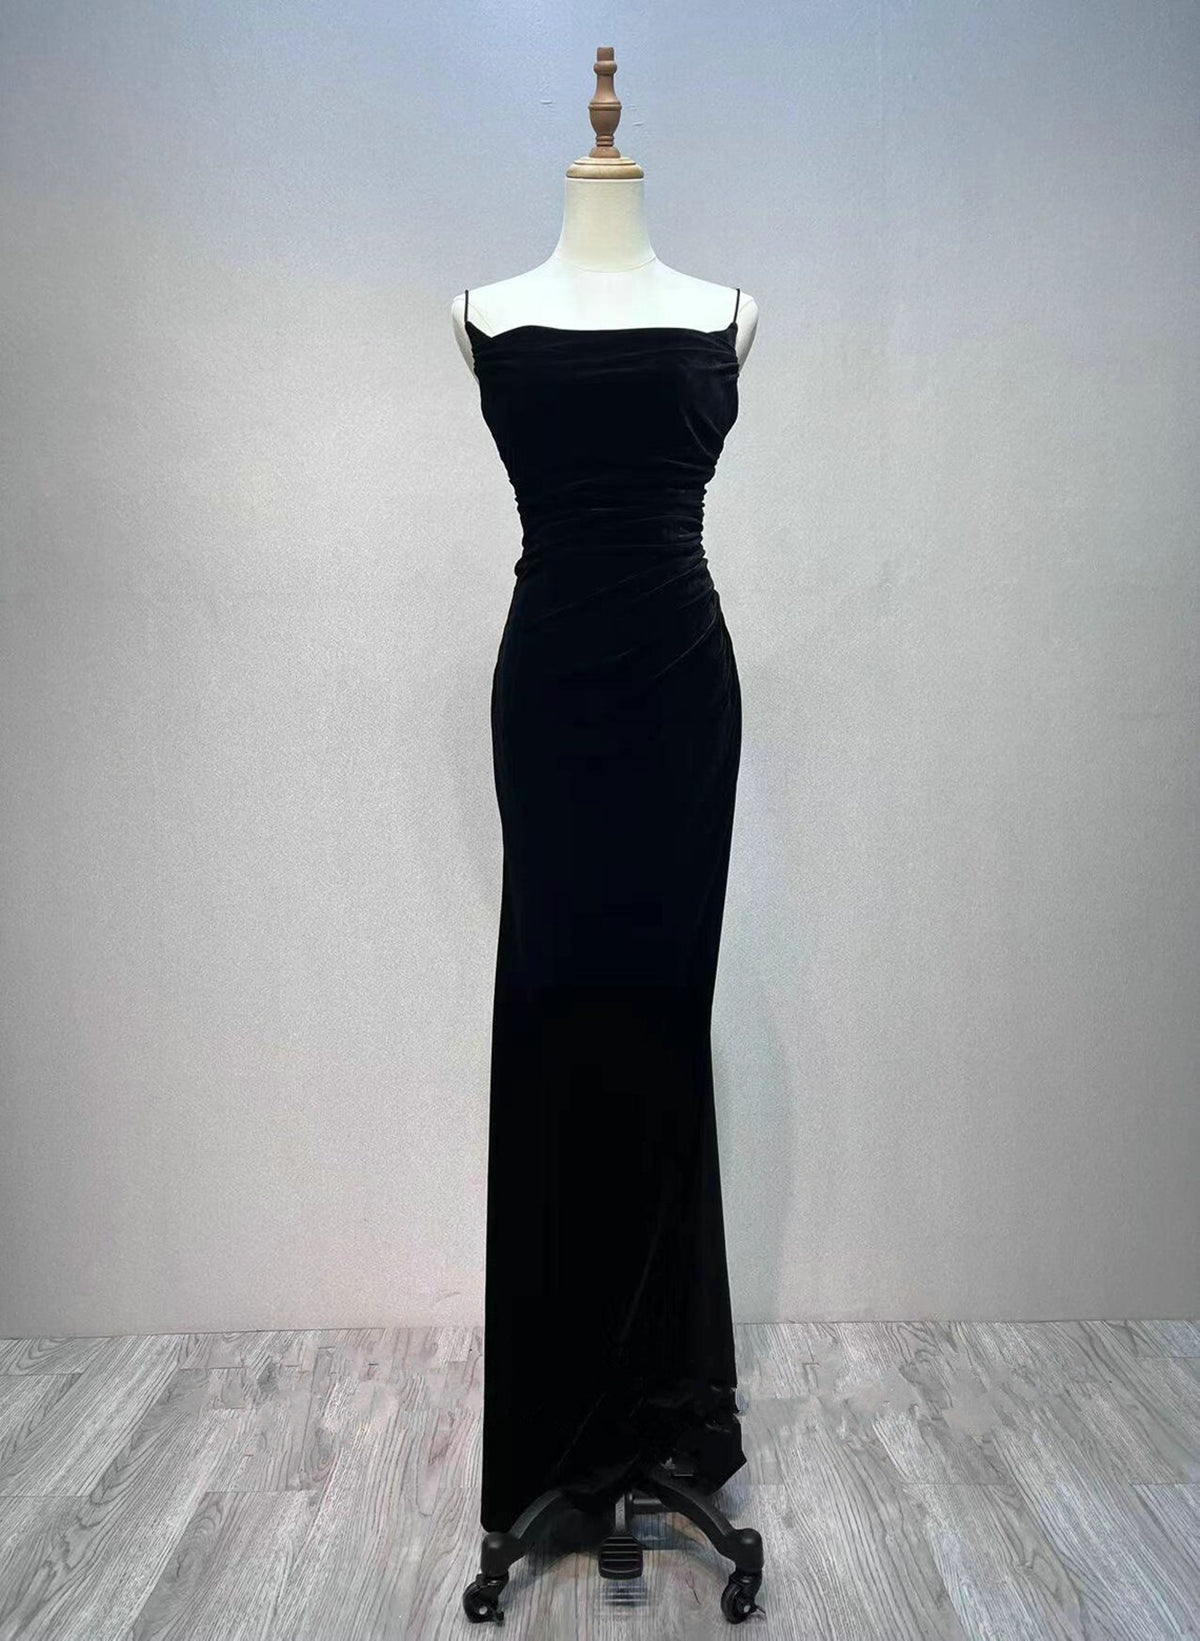 Black Velvet A-line Straps Wedding Party Dress Outfits For Girls, Black Long Evening Dress Outfits For Women Prom Dress